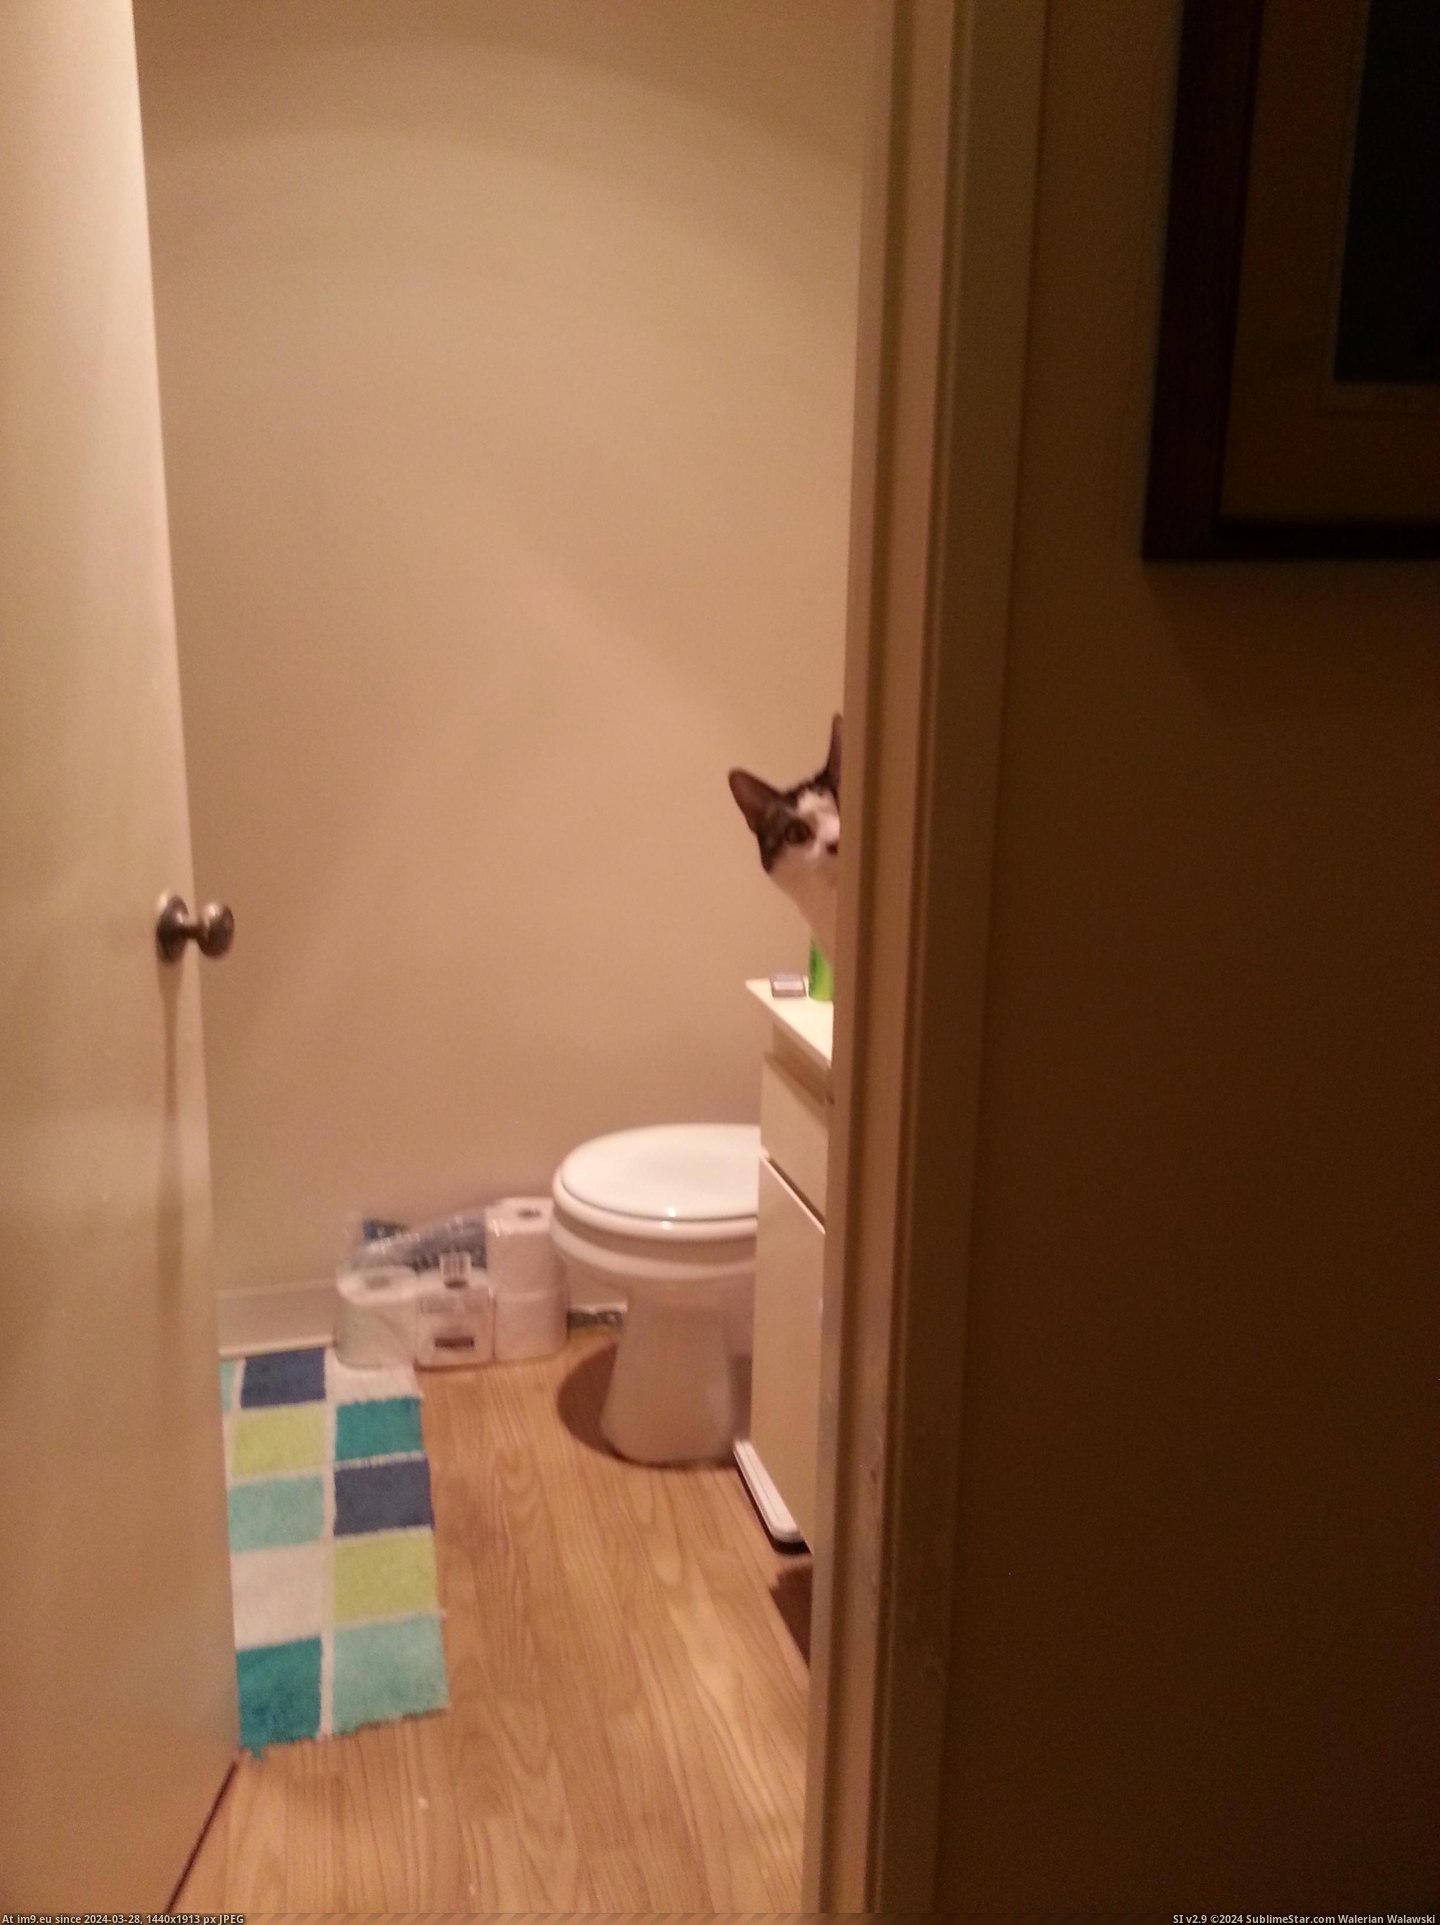 #Cats #For #Cat #Him #Run #Way #Water #Bathroom [Cats] This is my cat's way of asking me to run the water for him in the bathroom Pic. (Изображение из альбом My r/CATS favs))